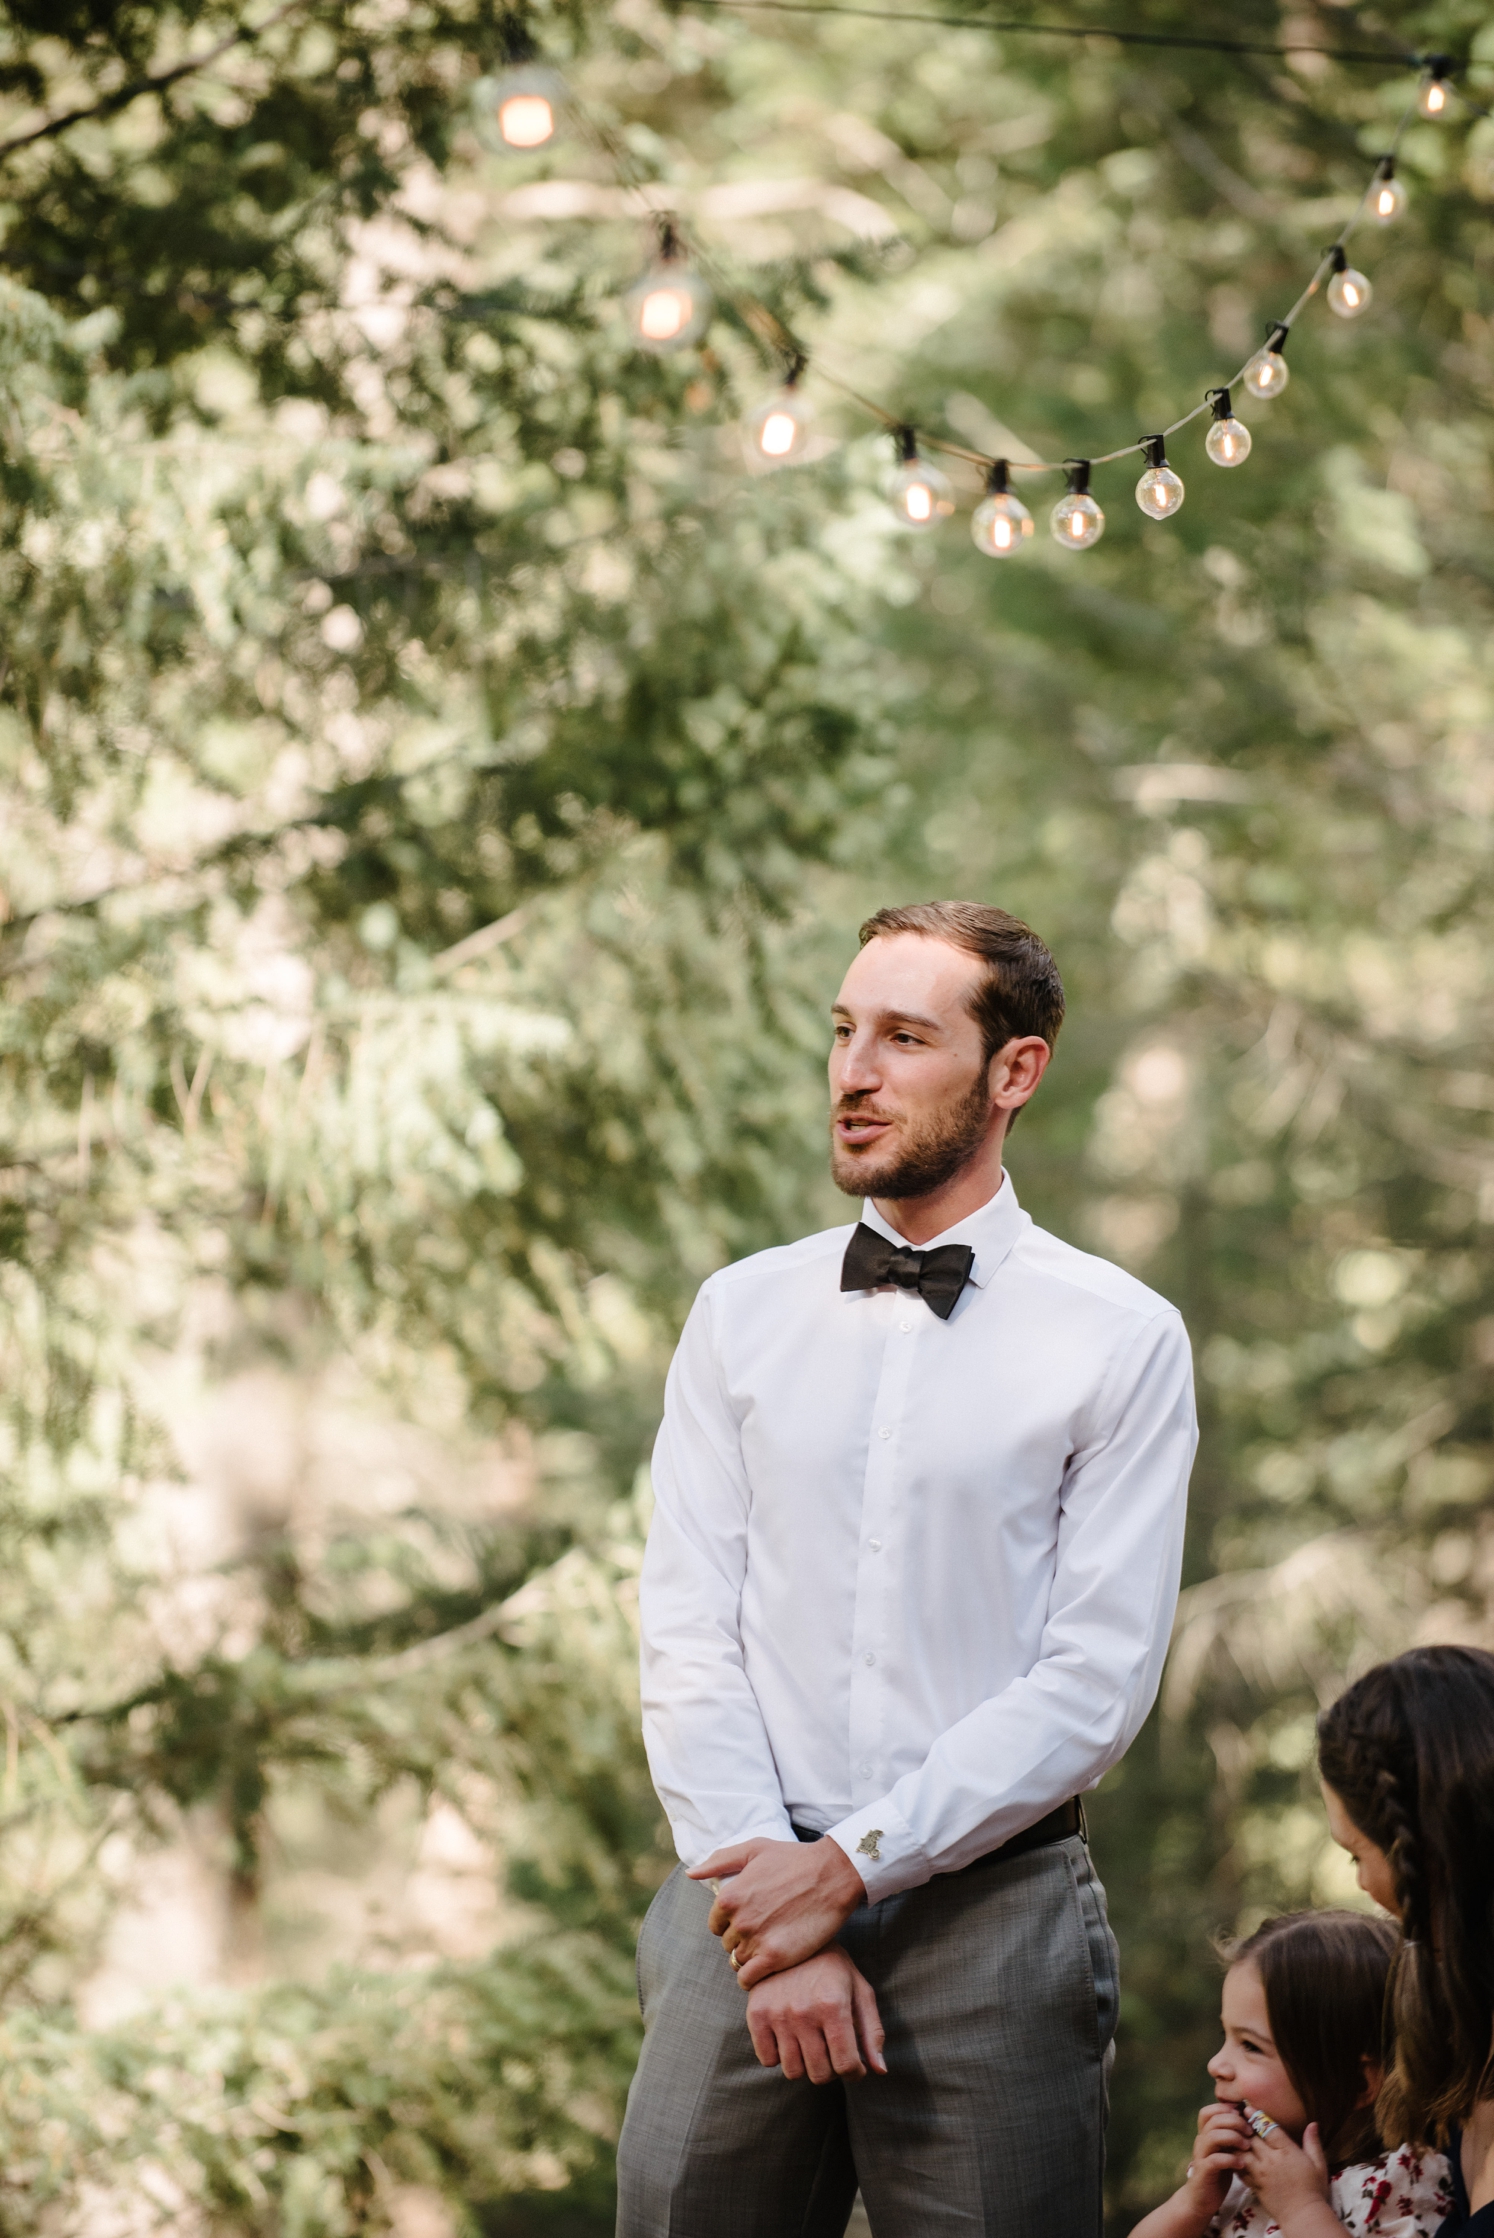 Wedding guest speaking to couple during wedding ceremony | McArthur Weddings and Events